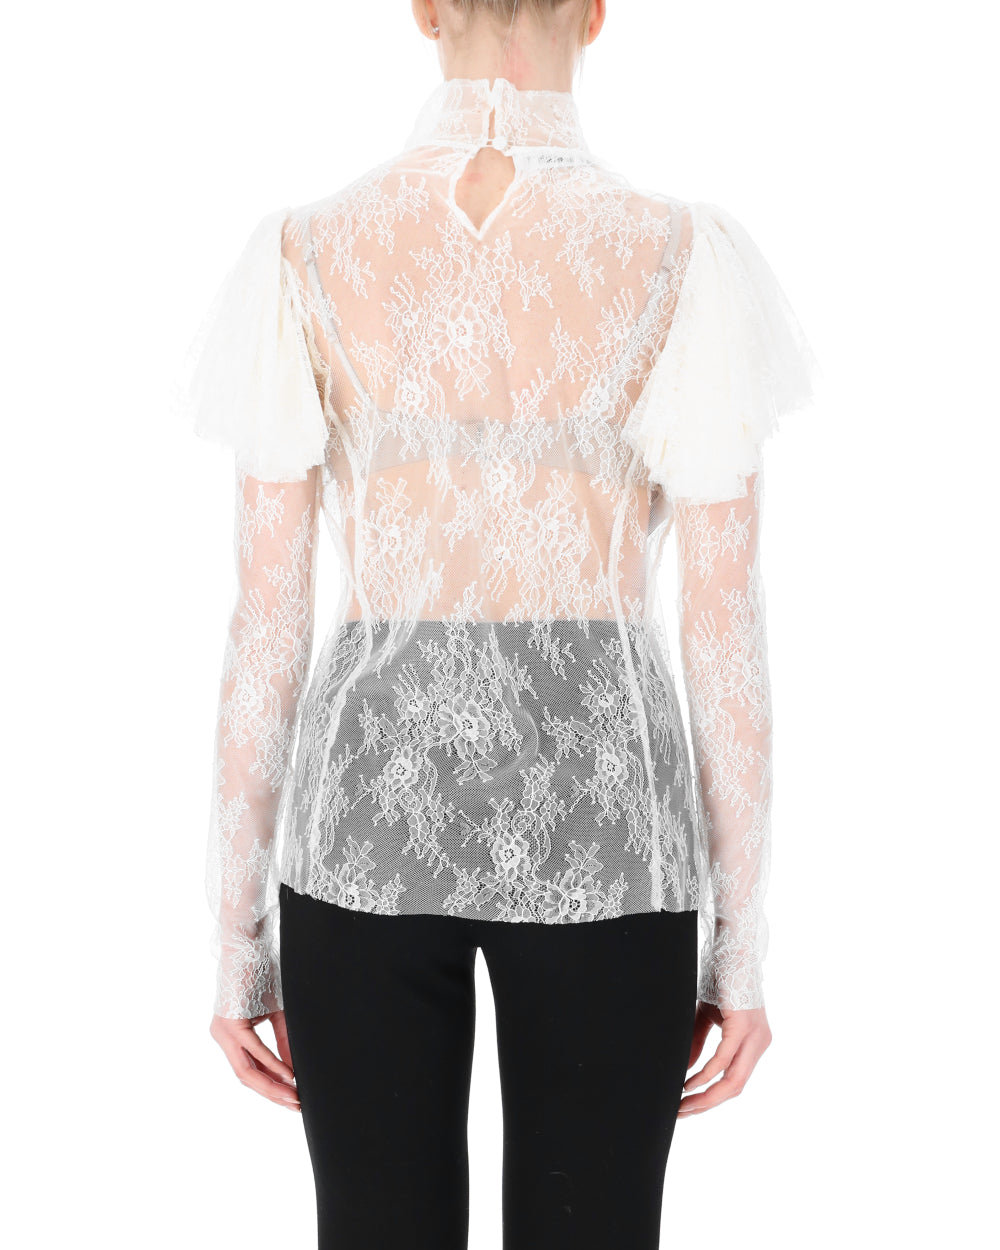 PHILOSOPHY | BLUSA IN PIZZO